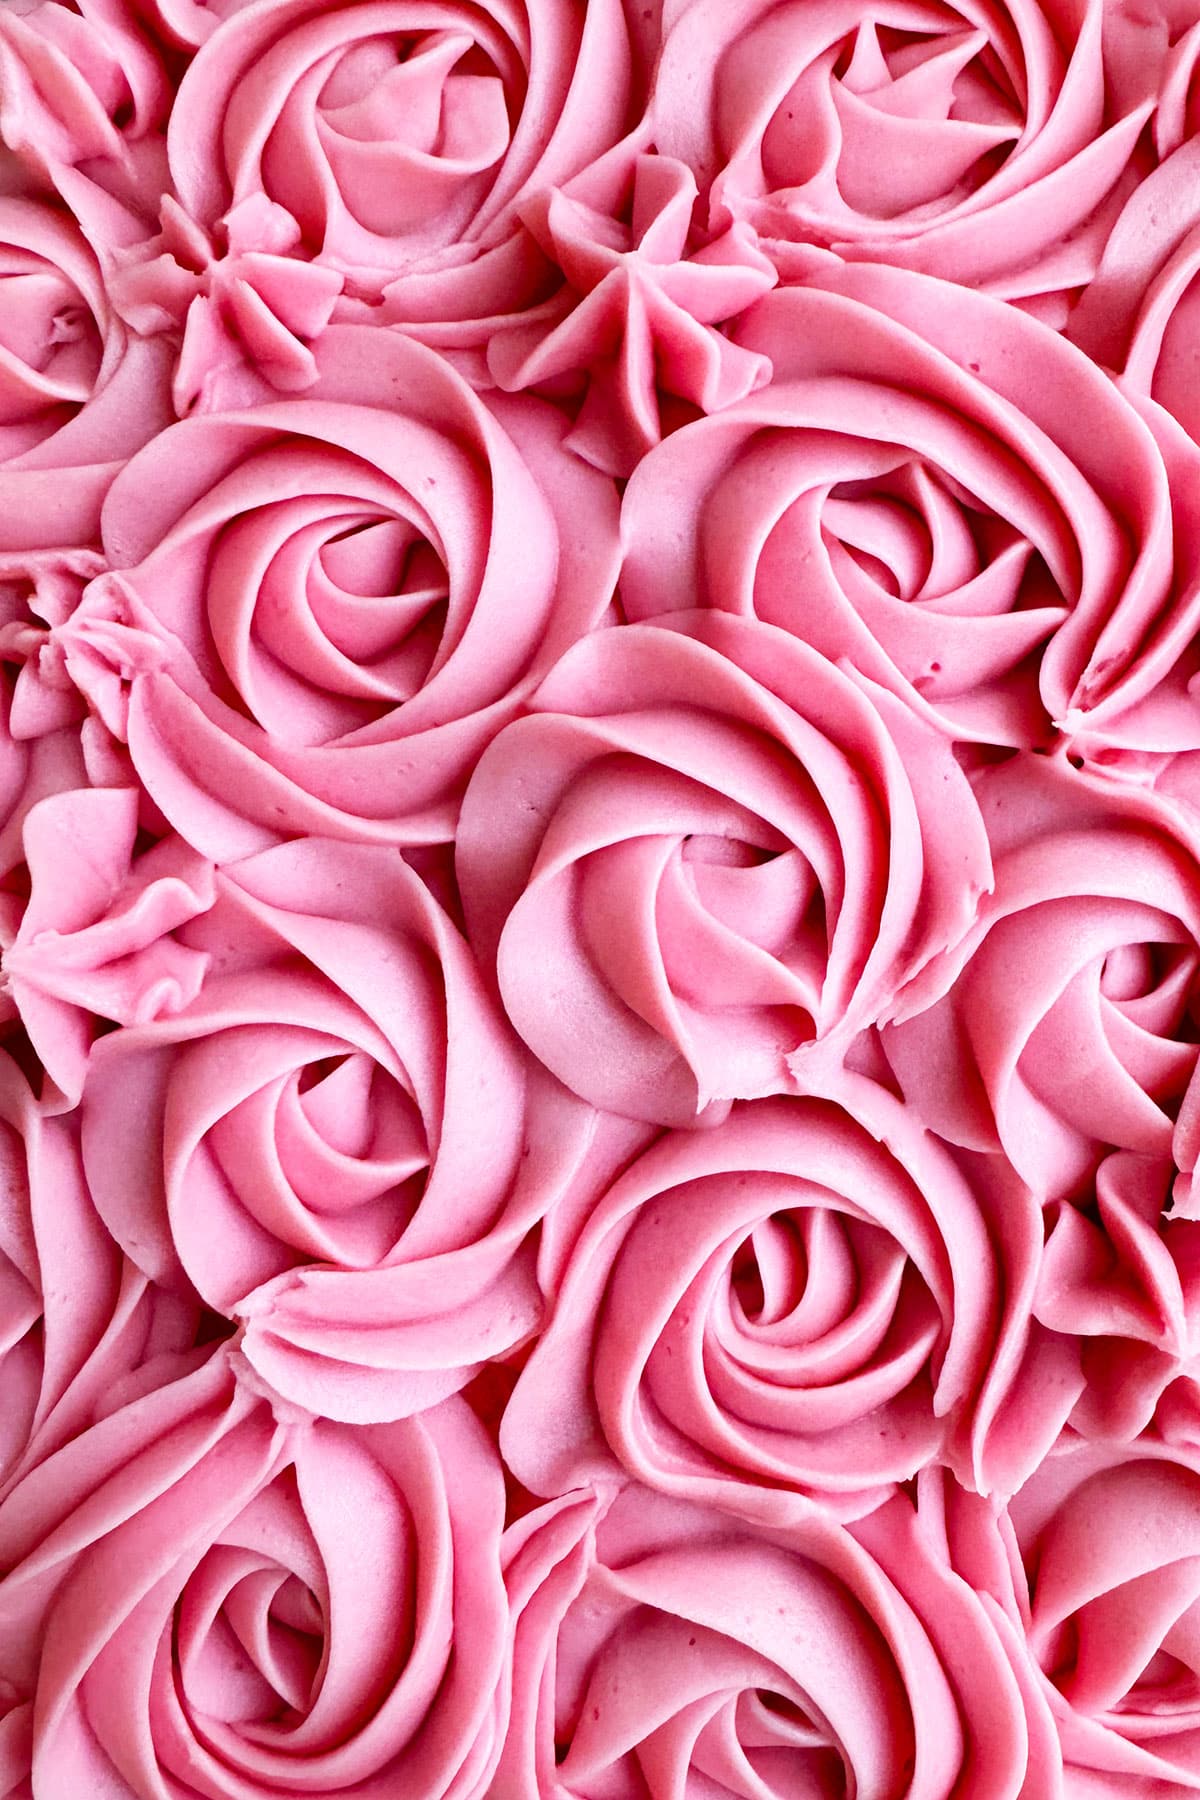 Closeup Shot of Piped Pink Buttercream Roses. 